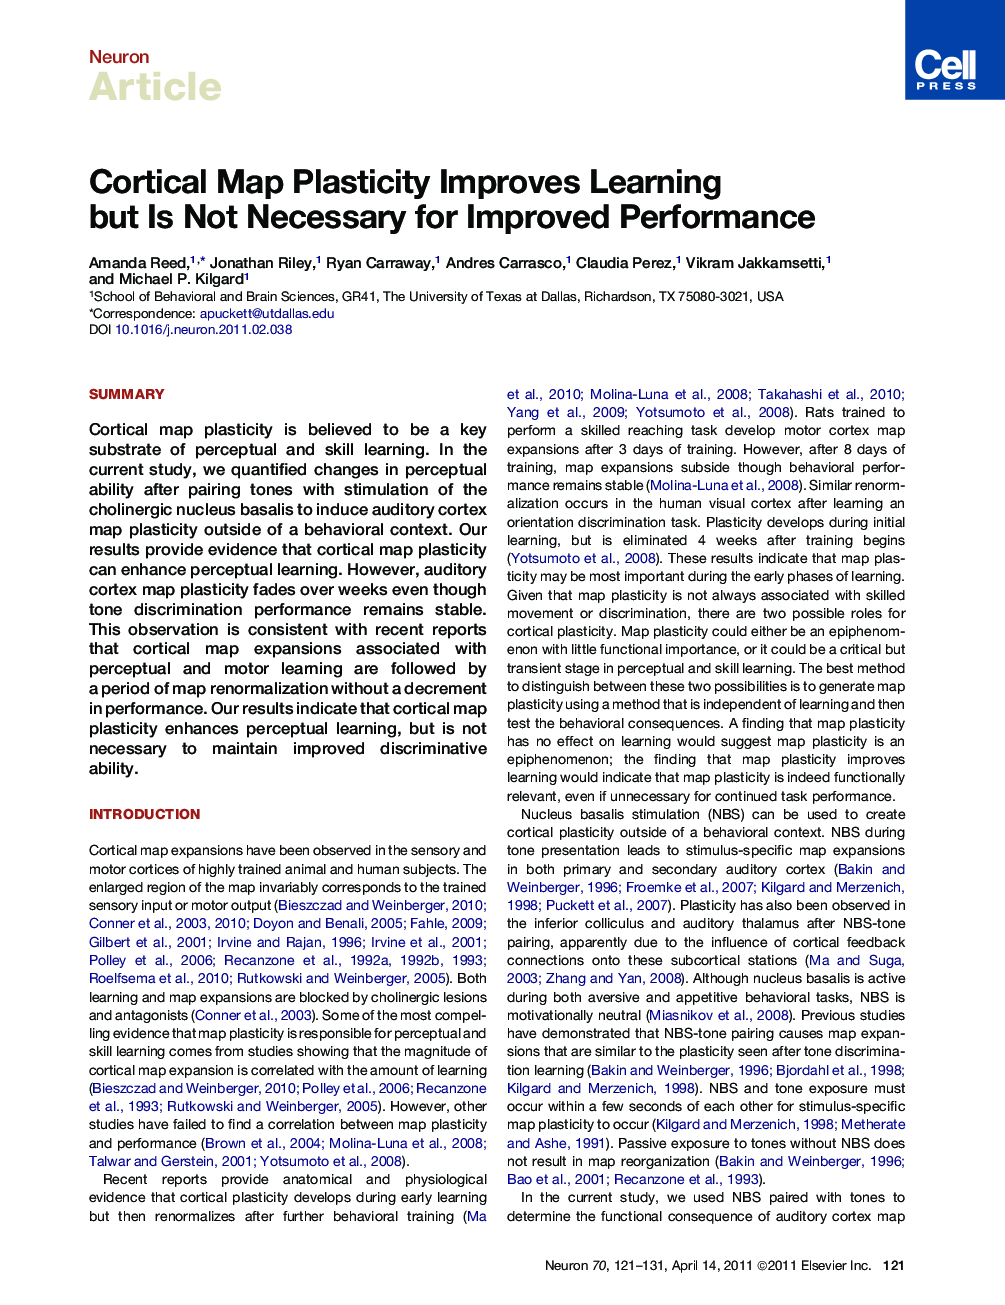 Cortical Map Plasticity Improves Learning but Is Not Necessary for Improved Performance